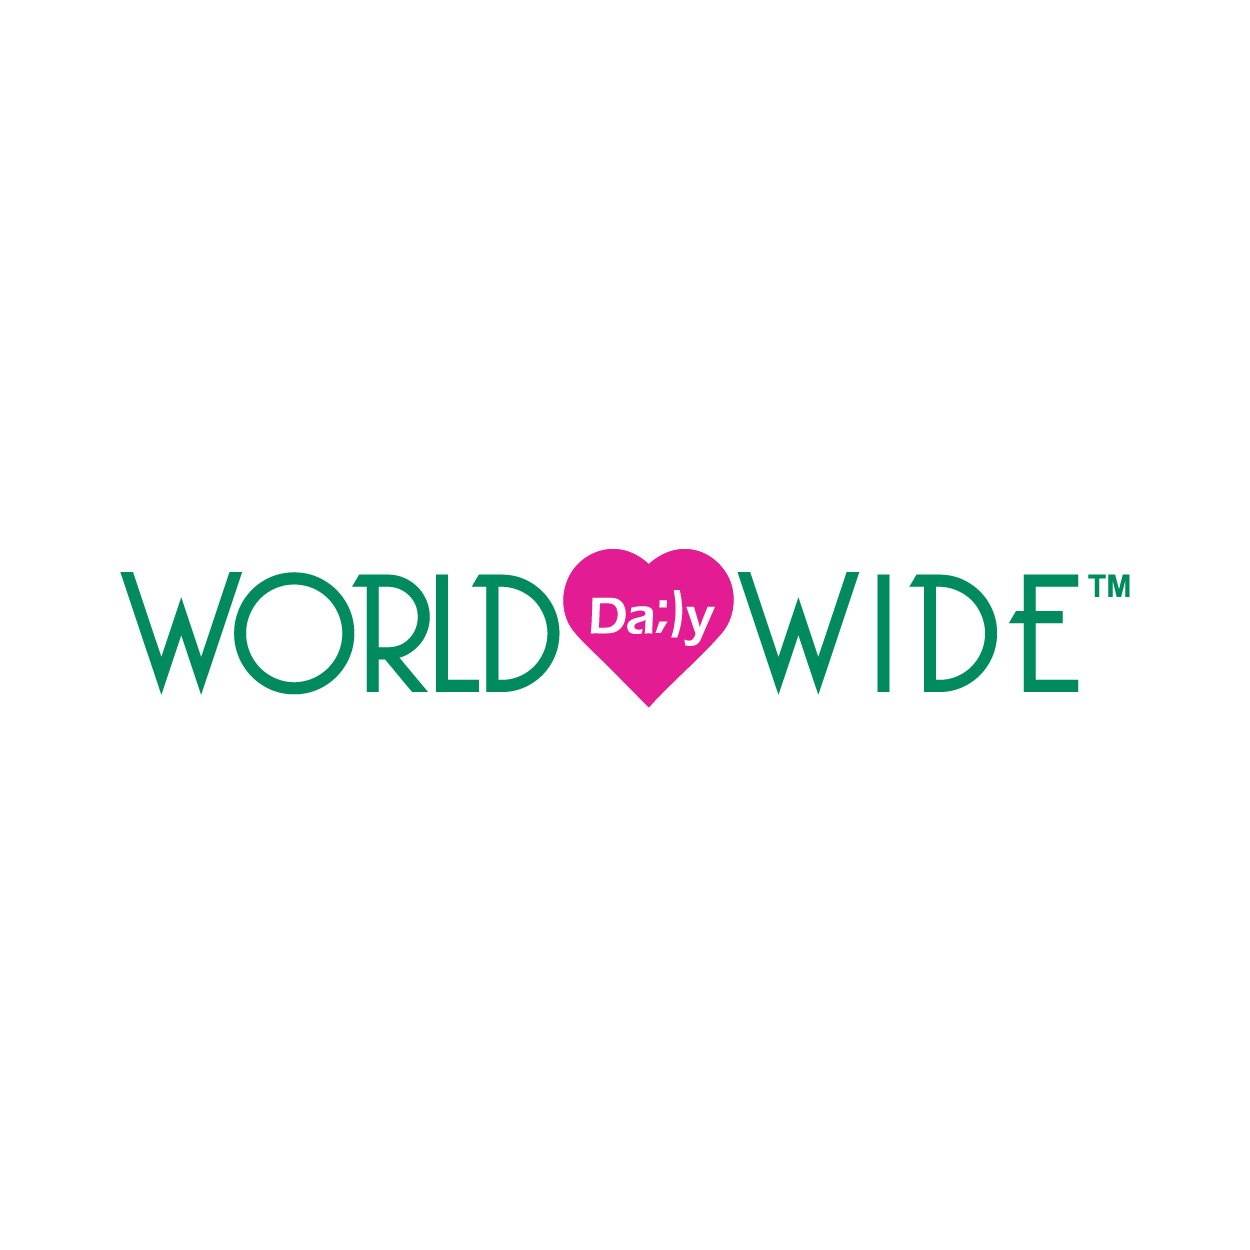 Living a better life means better dental care. World Wide Daily has evolved traditional daily dental care and created the next generation of dental care devices